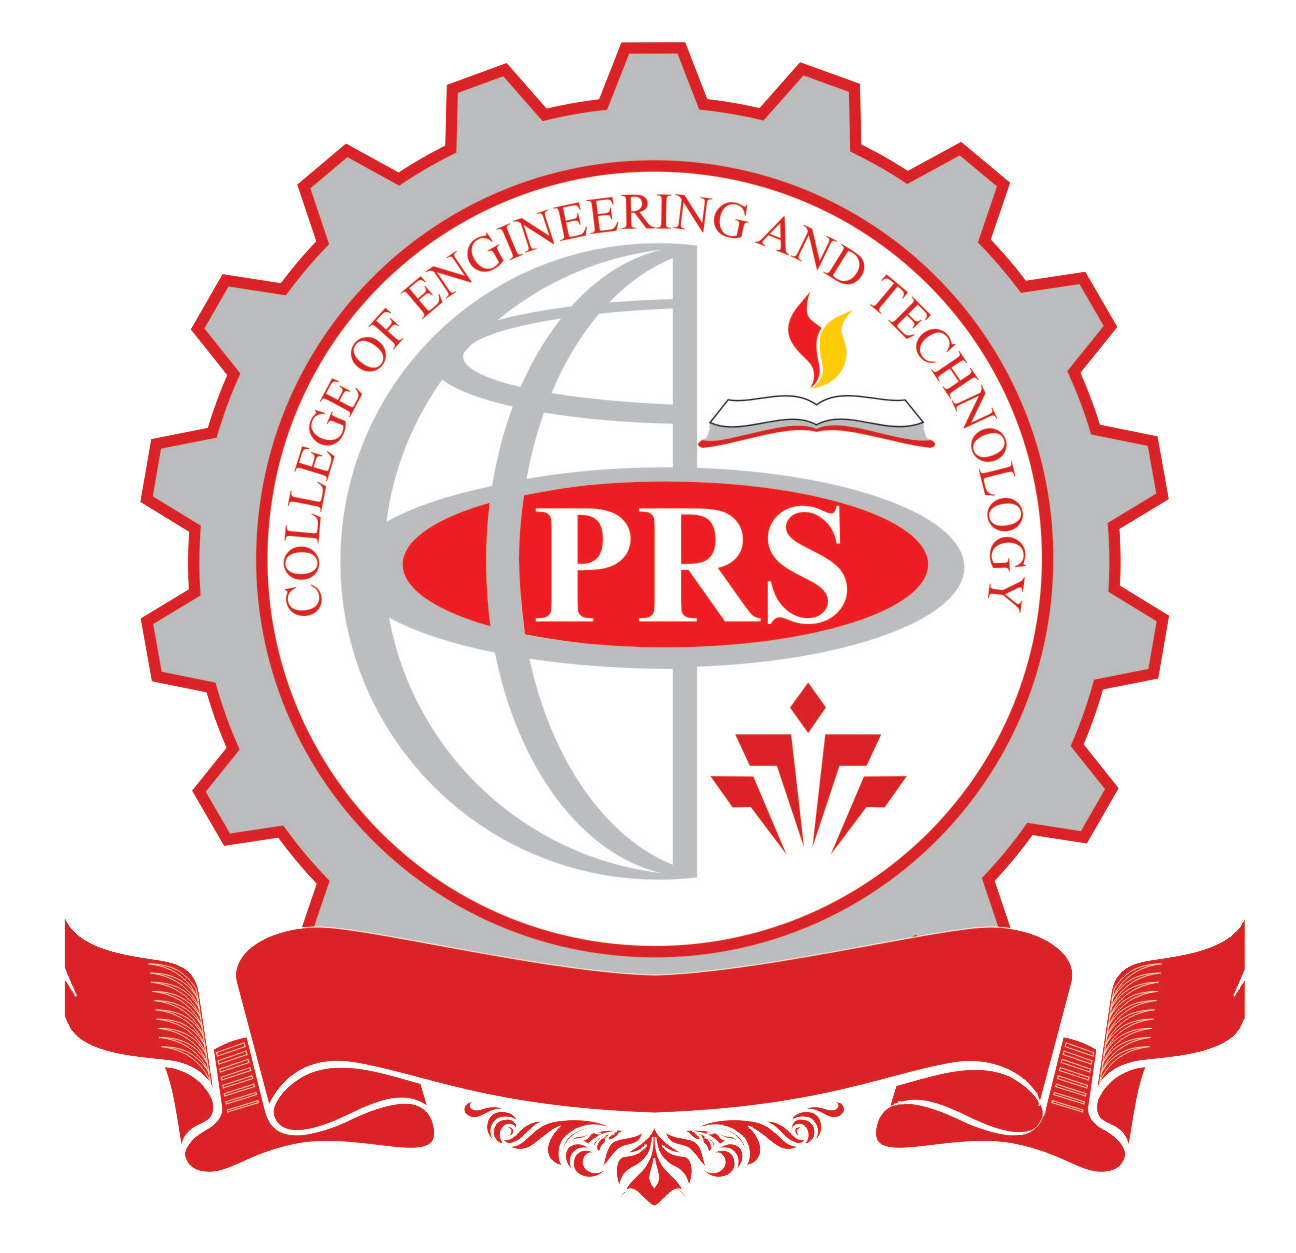 PRS COLLEGE OF ENGINEERING AND TECHNOLOGY